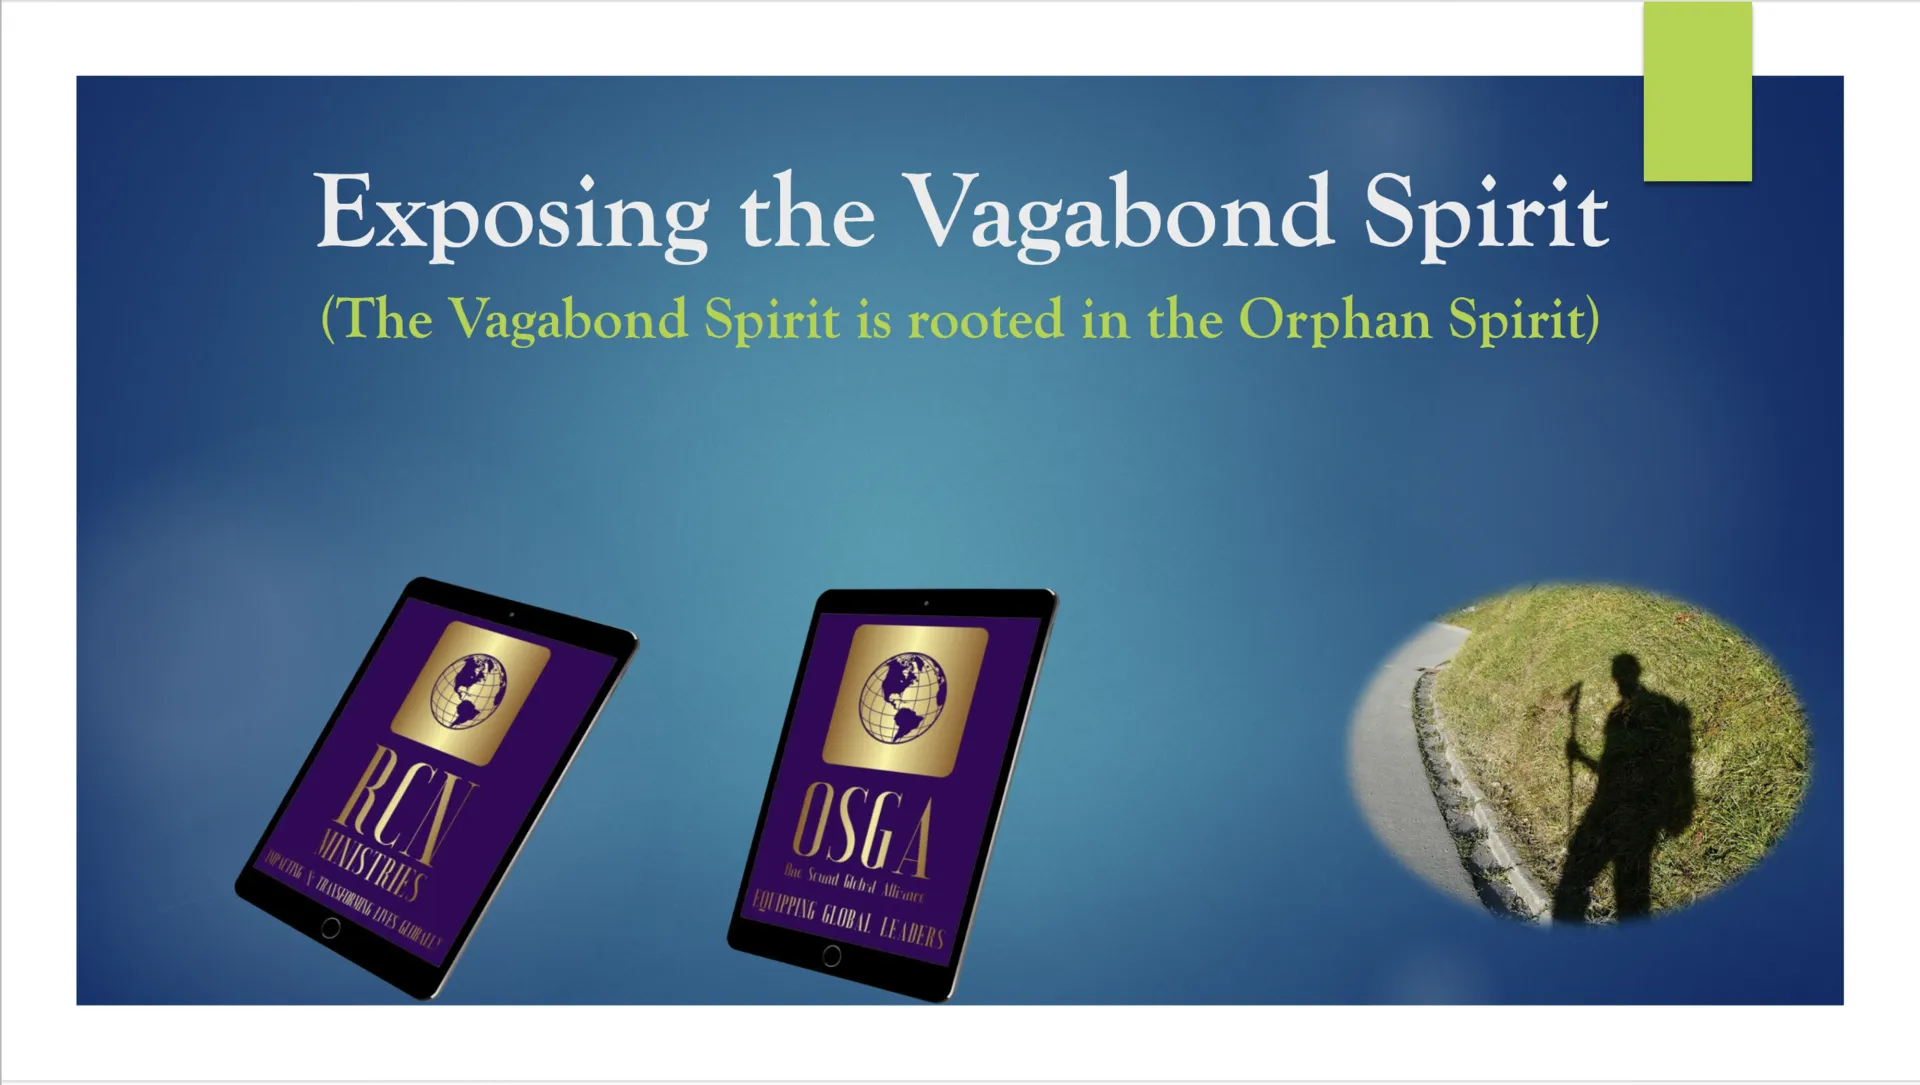 Exposing the Vagabond Spirit (The Vagabond Spirit is rooted in the Orphan Spirit)